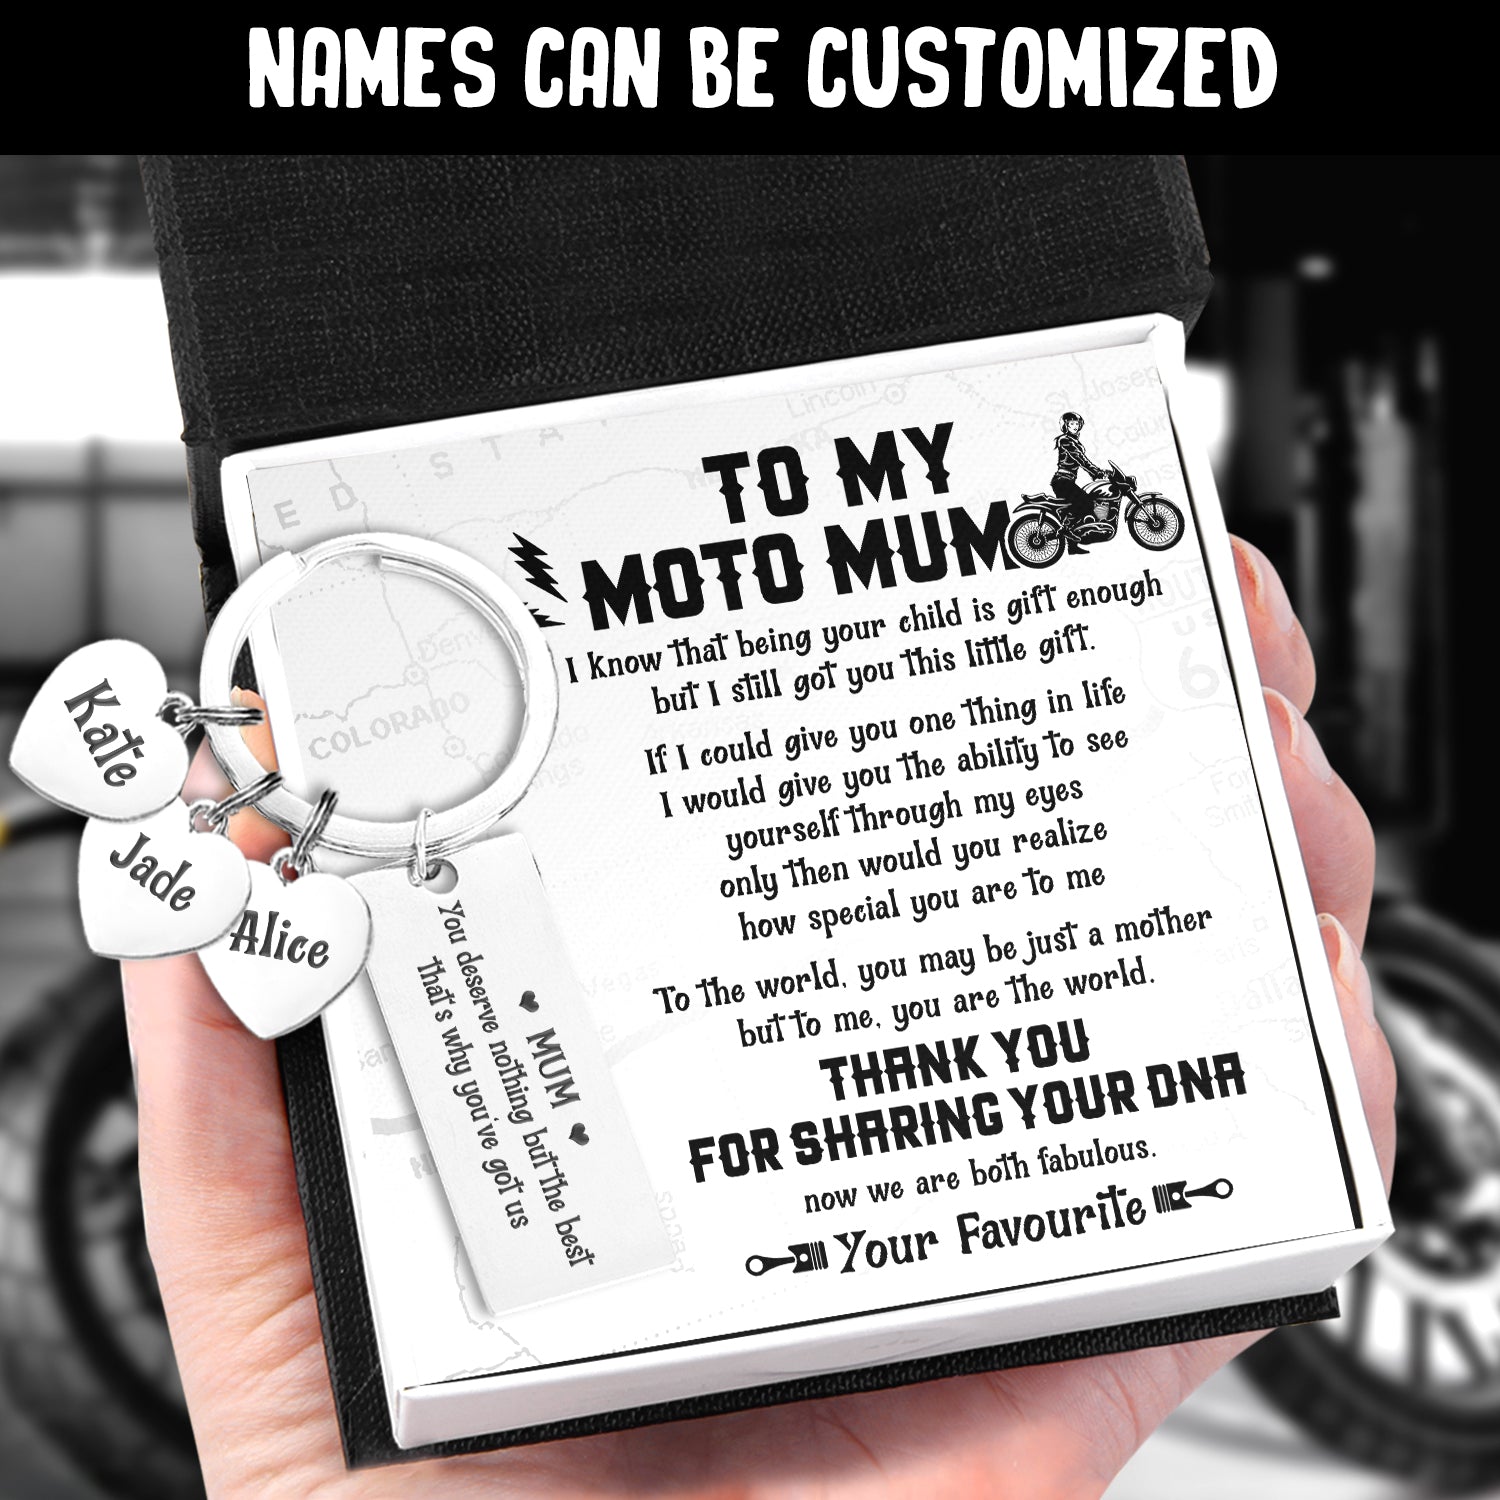 Personalised Keychain - Biker - To My Moto Mum - Thank You For Sharing Your DNA - Ukgkc19002